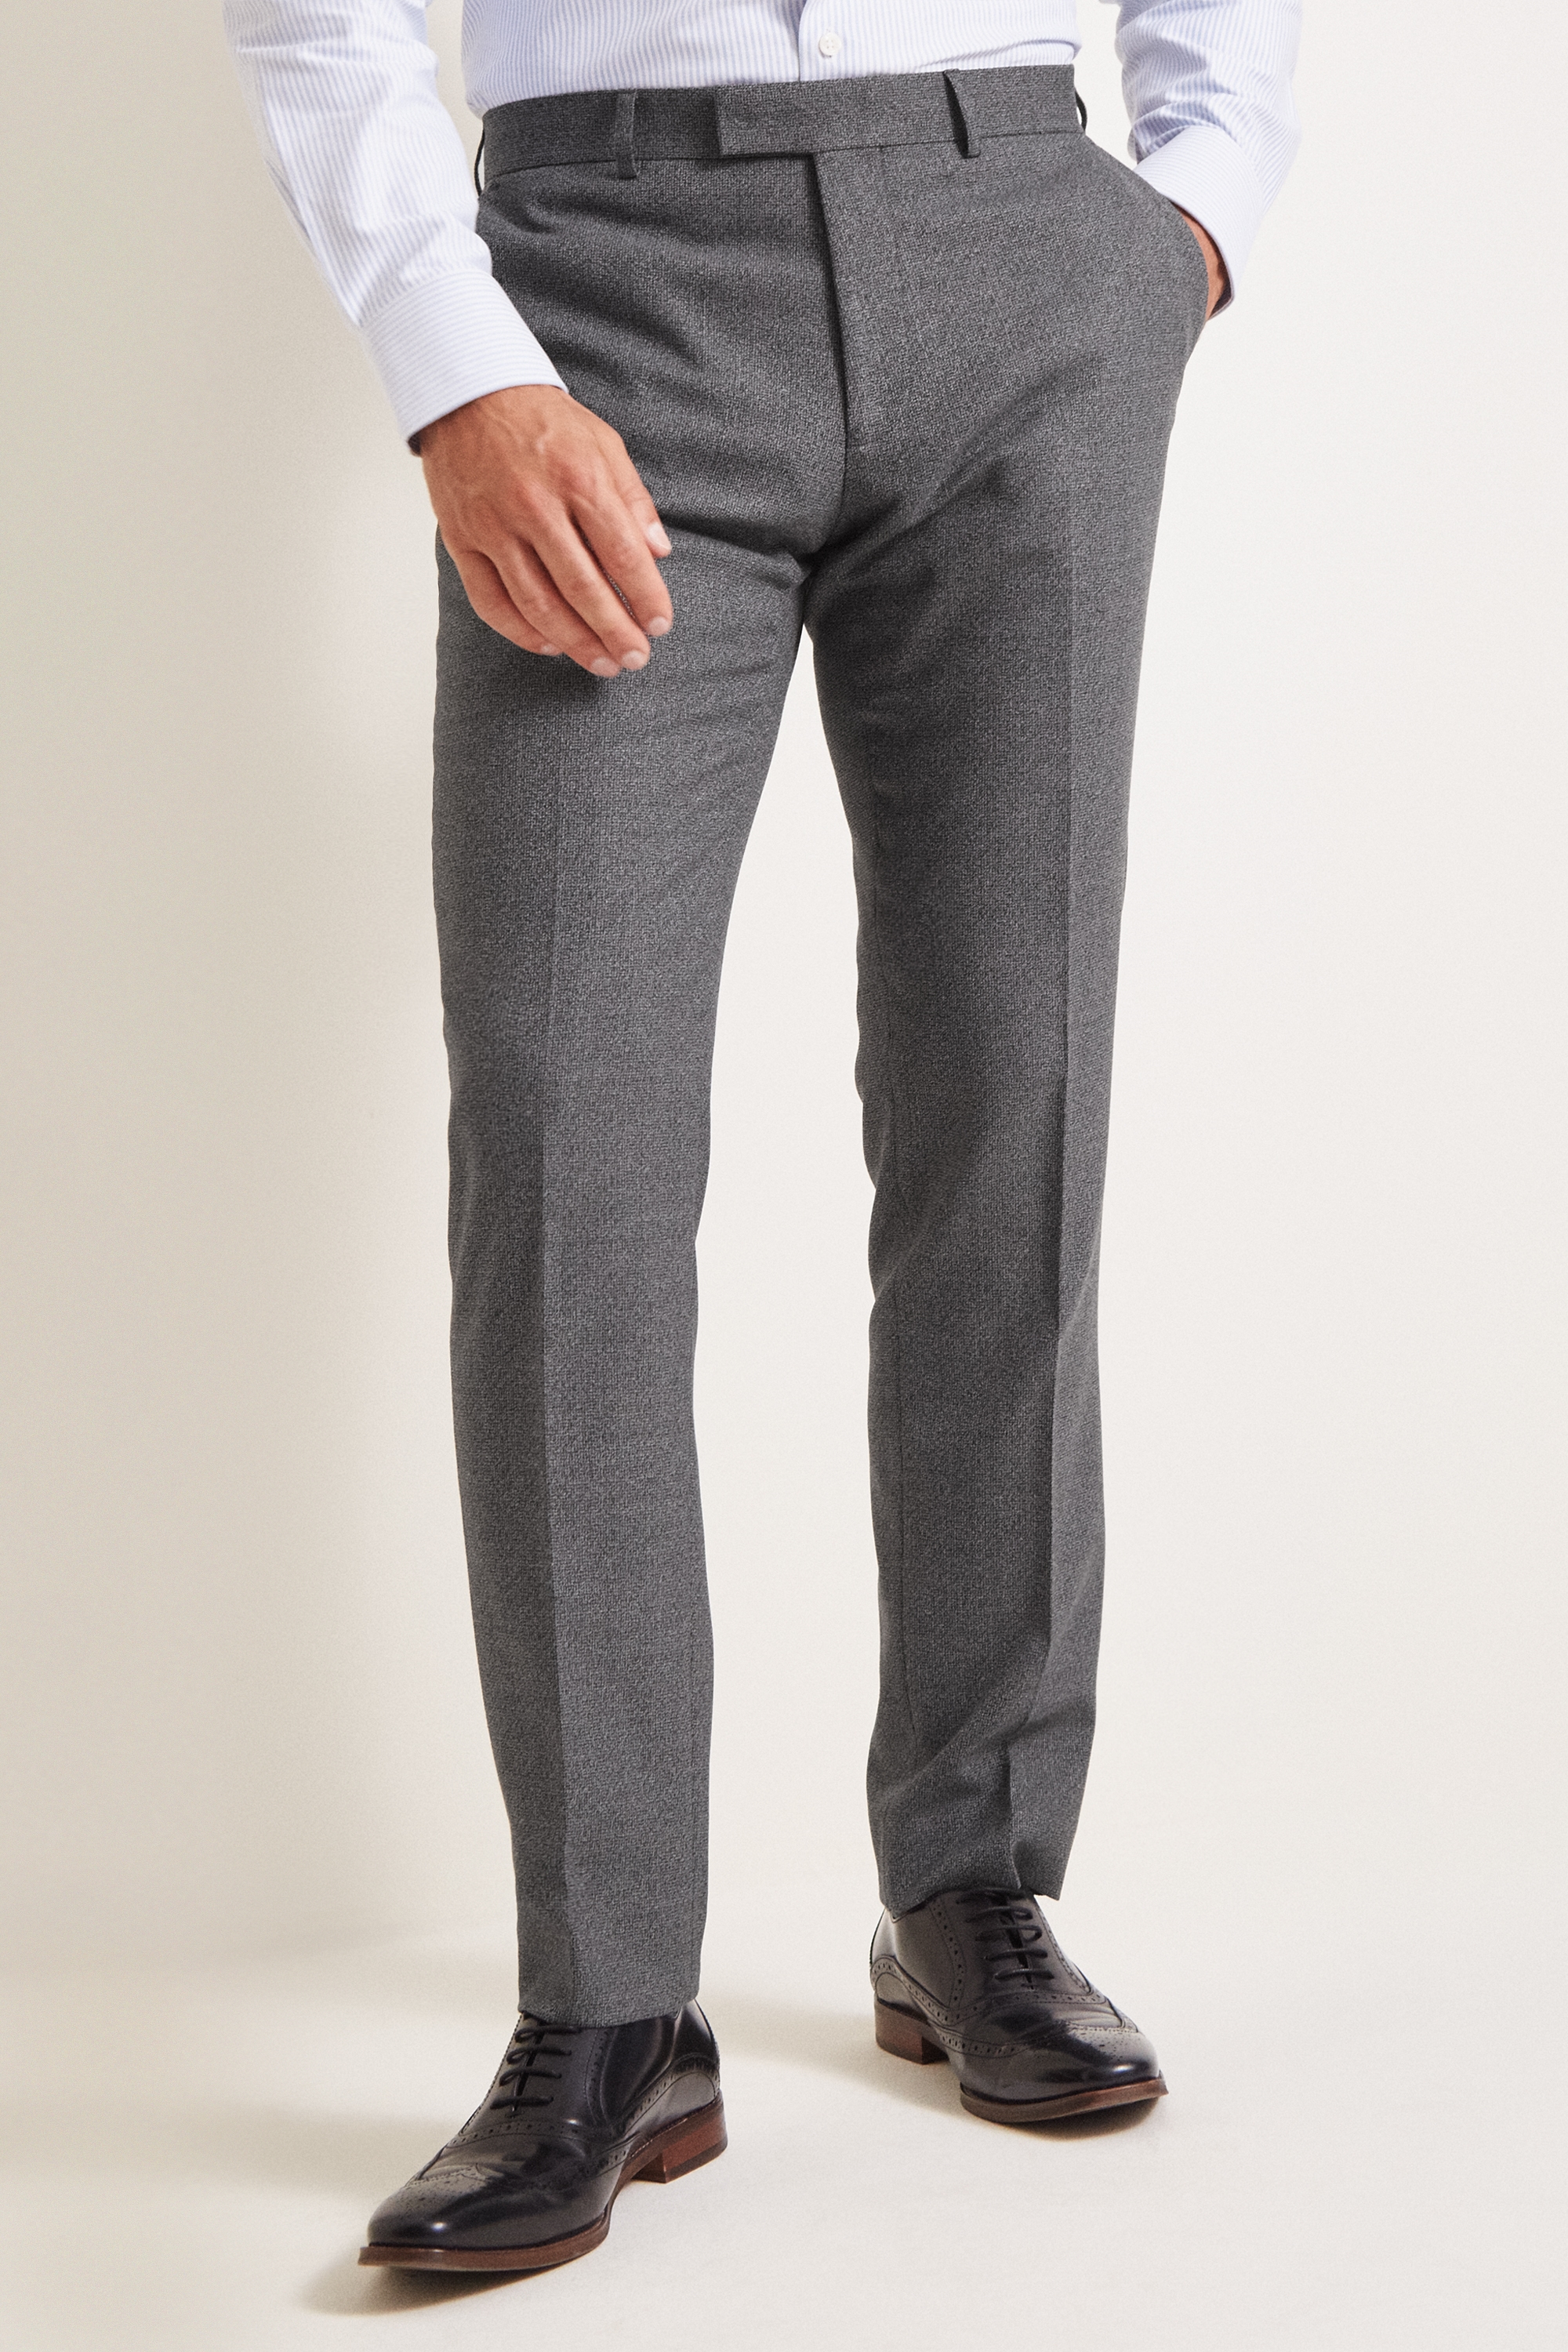 Moss 1851 Tailored Fit Grey Textured Trousers